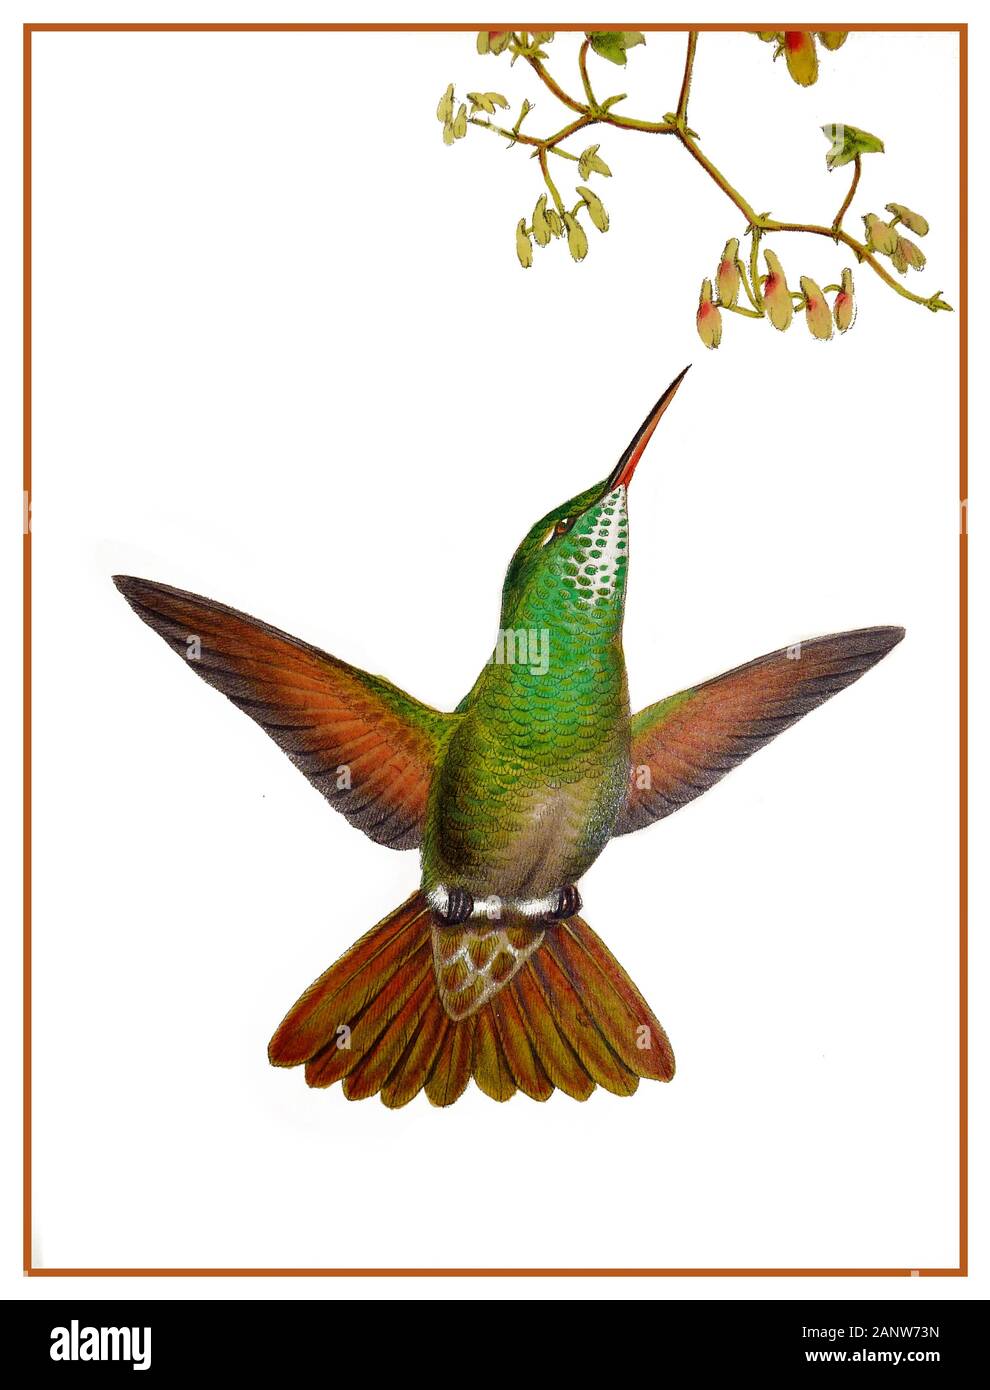 VINTAGE HUMMINGBIRD LITHOGRAPH John Gould (1804-1881) was a prolific bird artist and the most celebrated ornithologist of Victorian Britain Hummingbirds are birds native to the Americas and constituting the biological family Trochilidae. Stock Photo